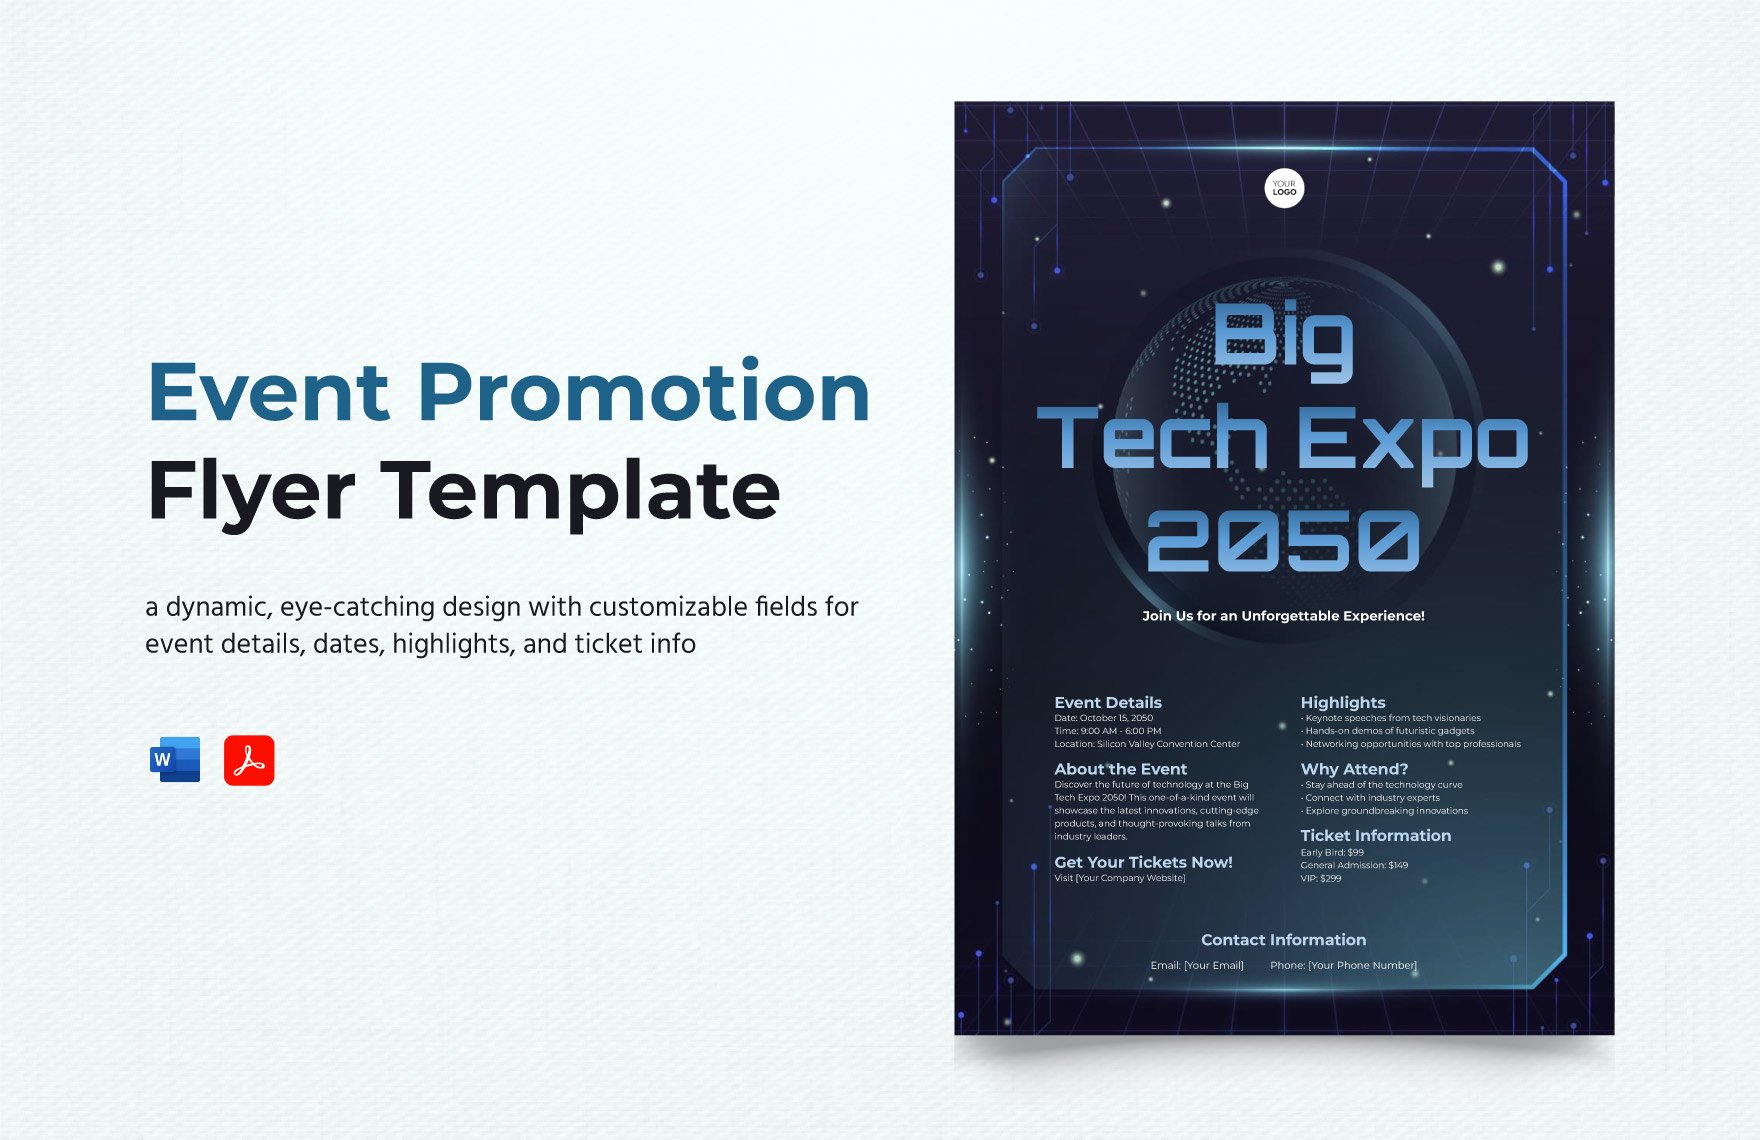 Event Promotion Flyer Template